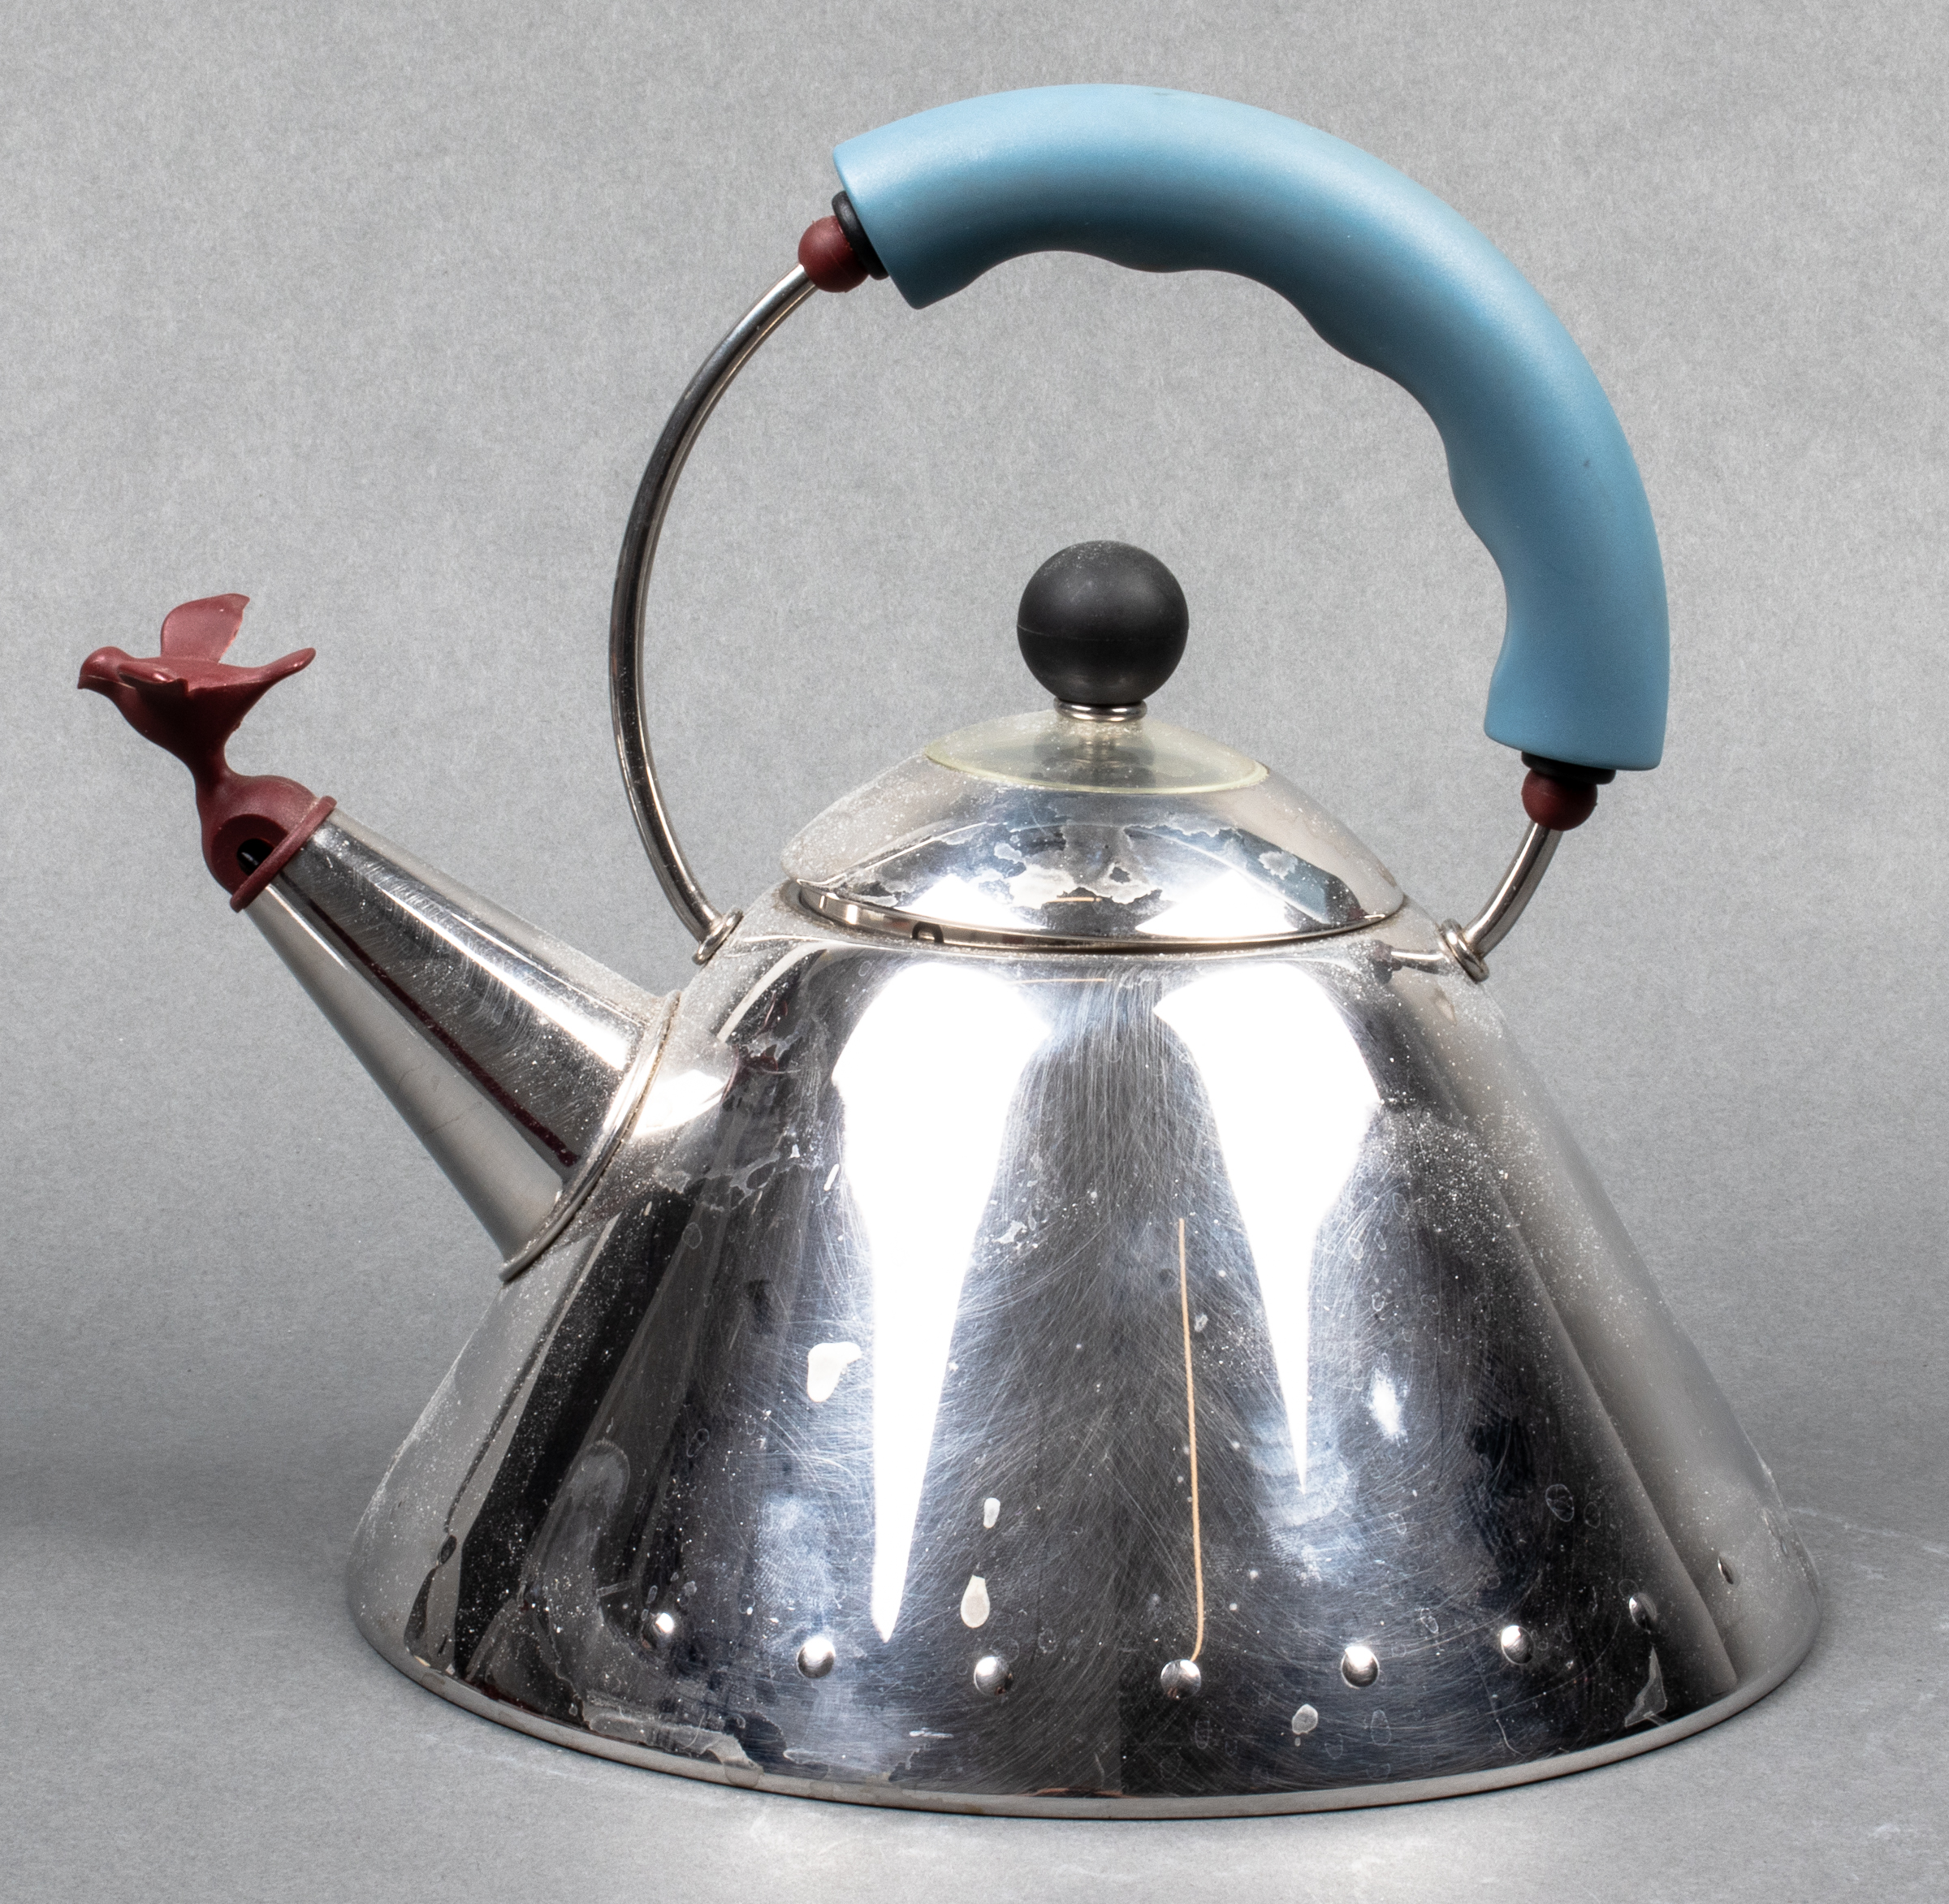 MICHAEL GRAVES FOR ALESSI STAINLESS 3c313e